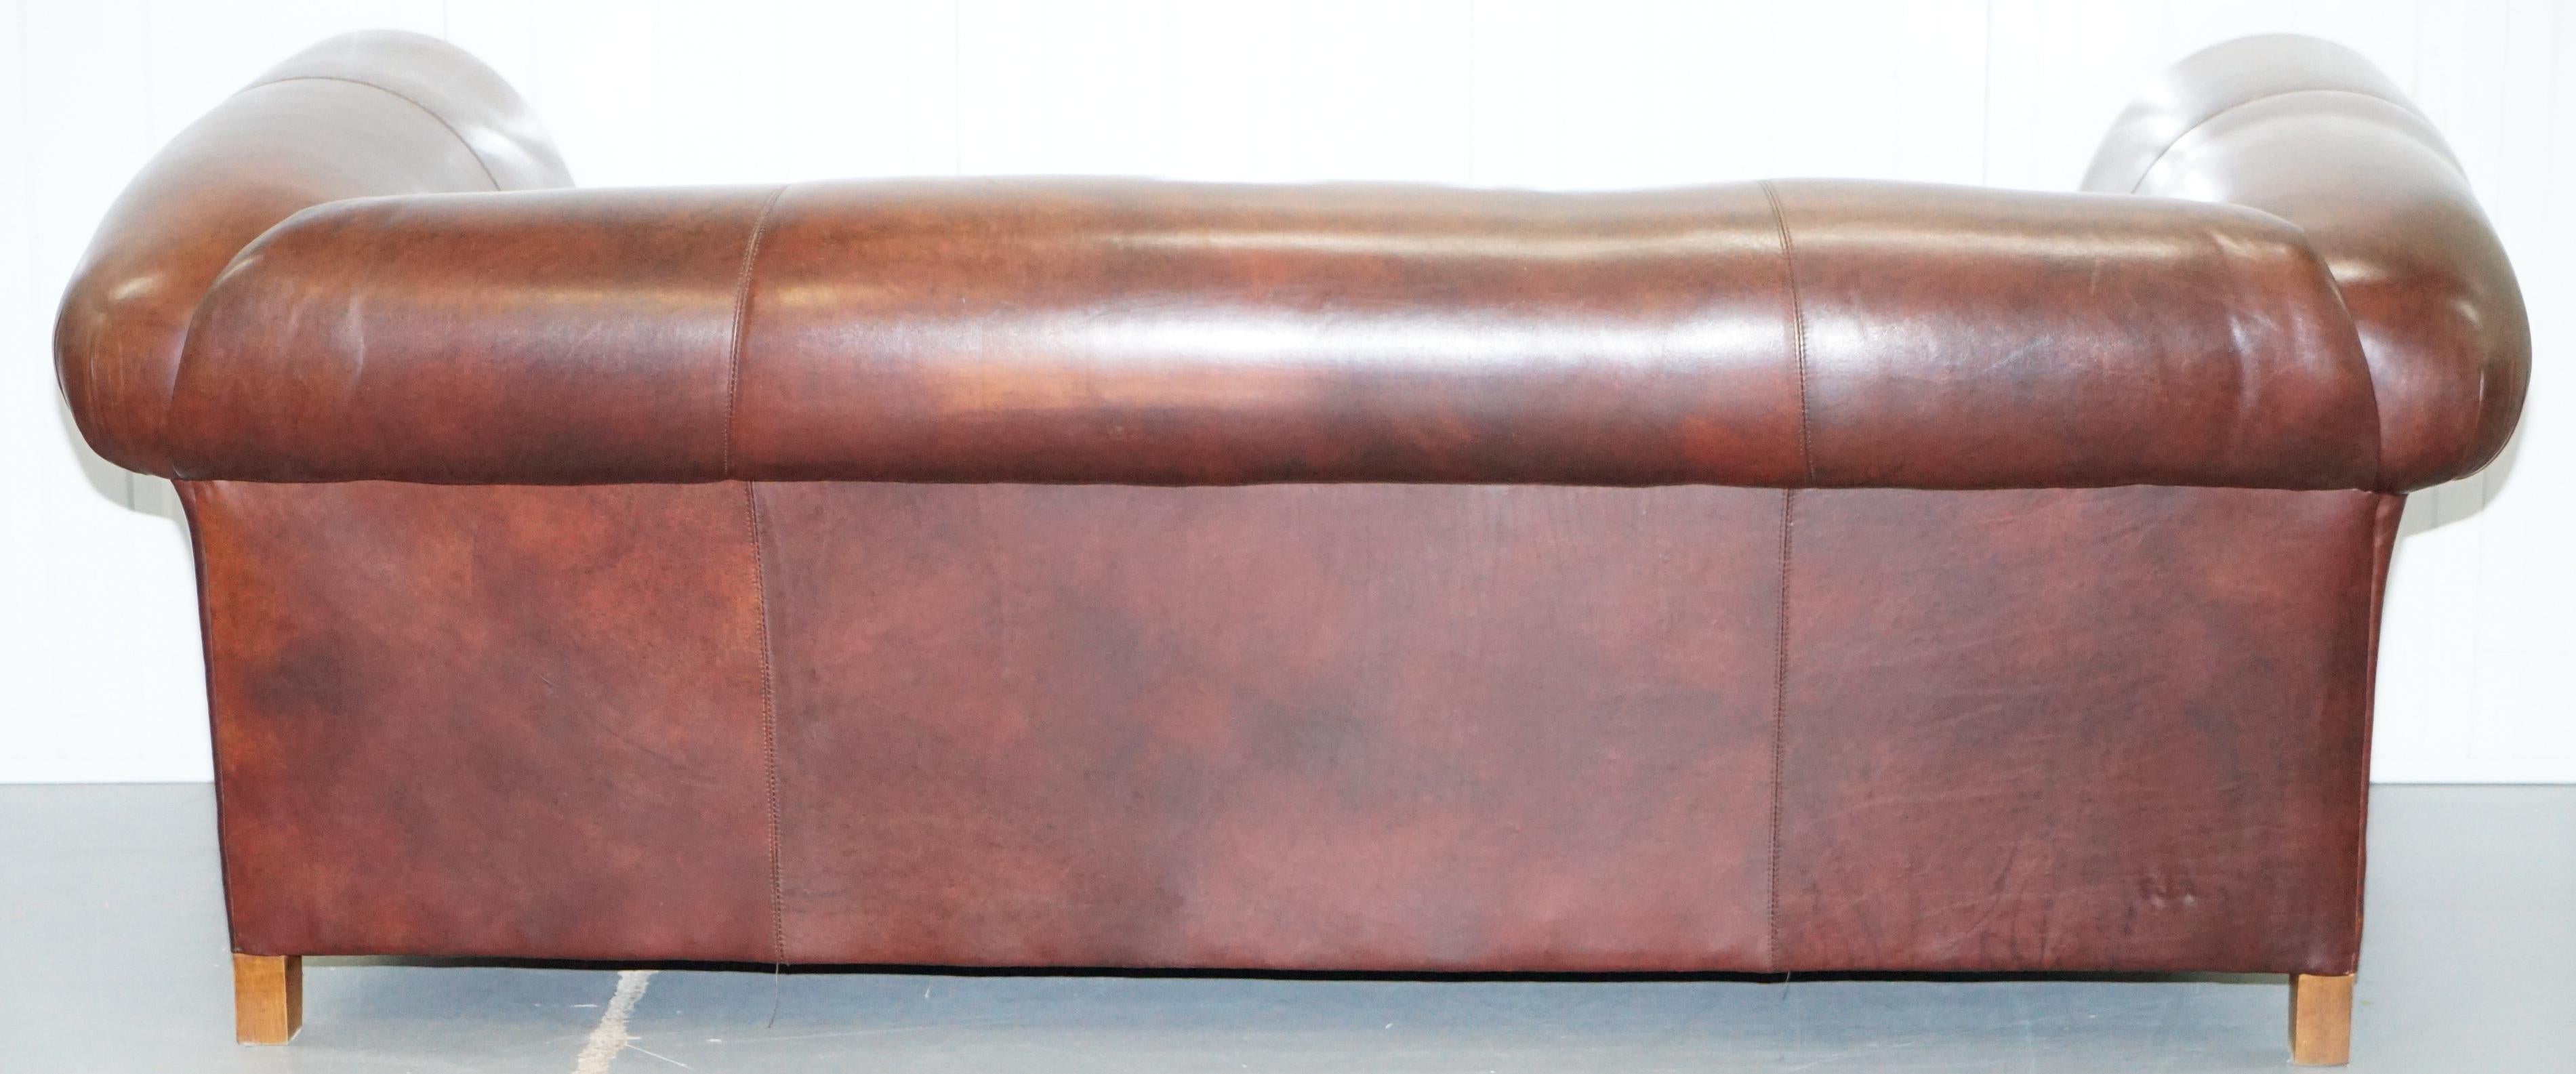 Large Buffalo Vintage Brown Leather Sofa Feather Filled Cushions Coil Sprung 14